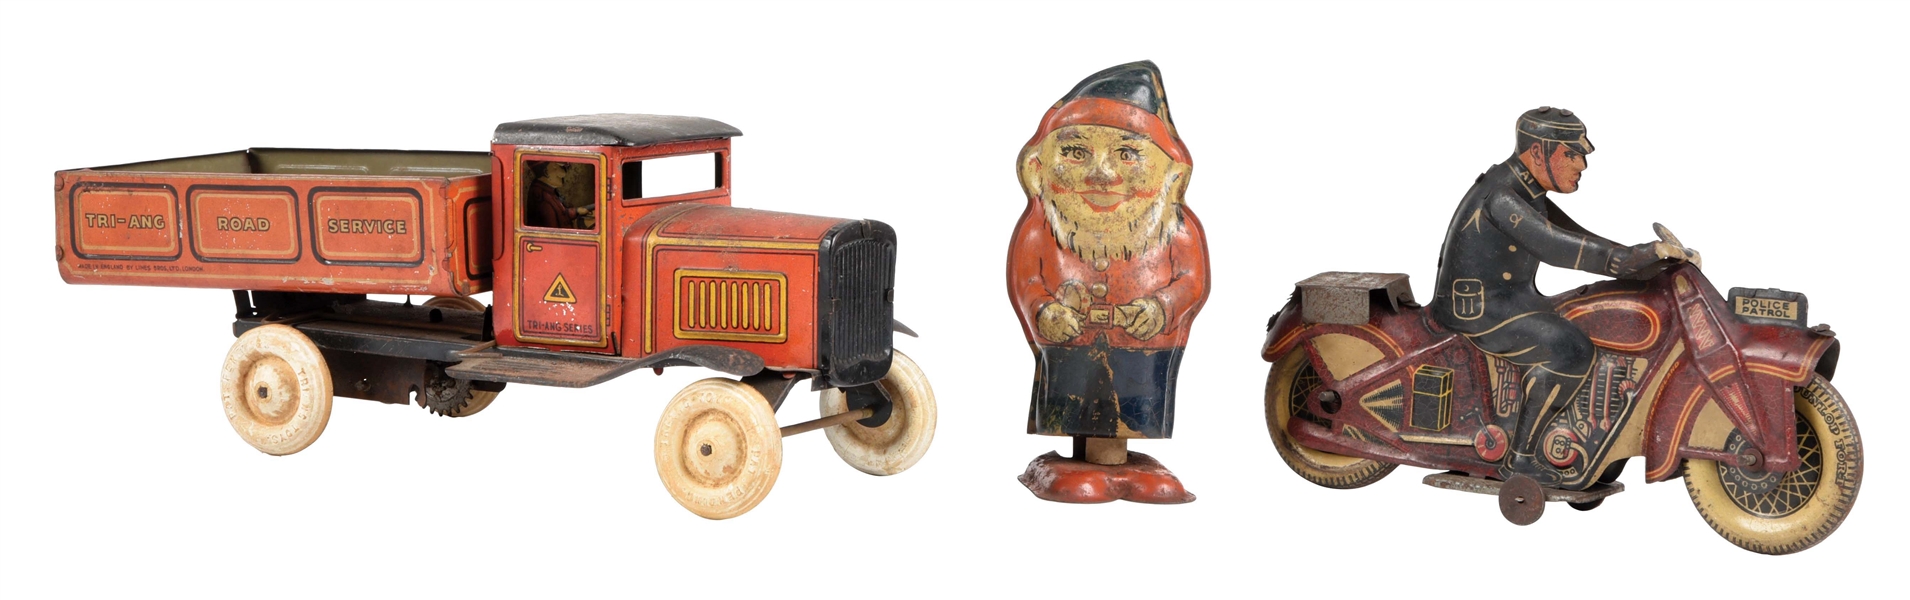 LOT OF 3: EARLY TIN LITHO PRE WAR ENGLISH TOYS.